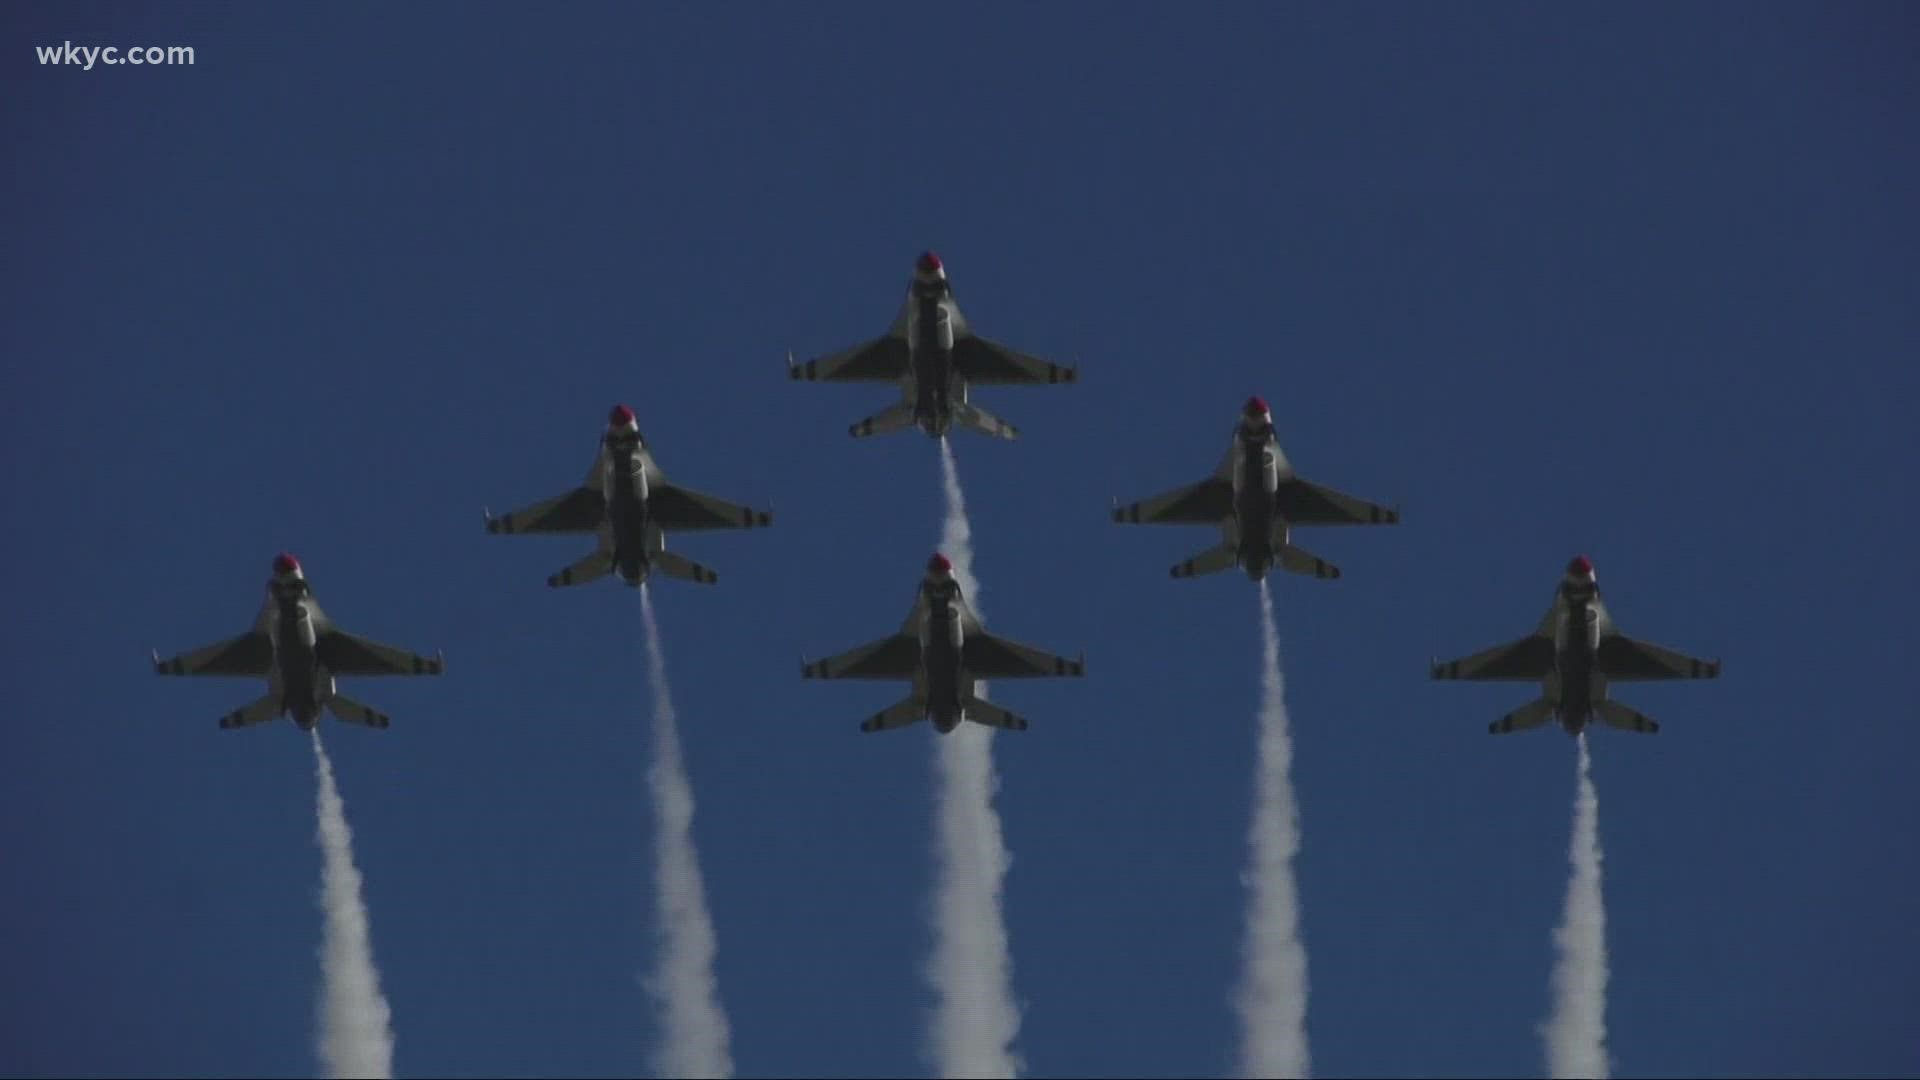 The Air Force Thunderbirds were out practicing Friday ahead of the main event this weekend!